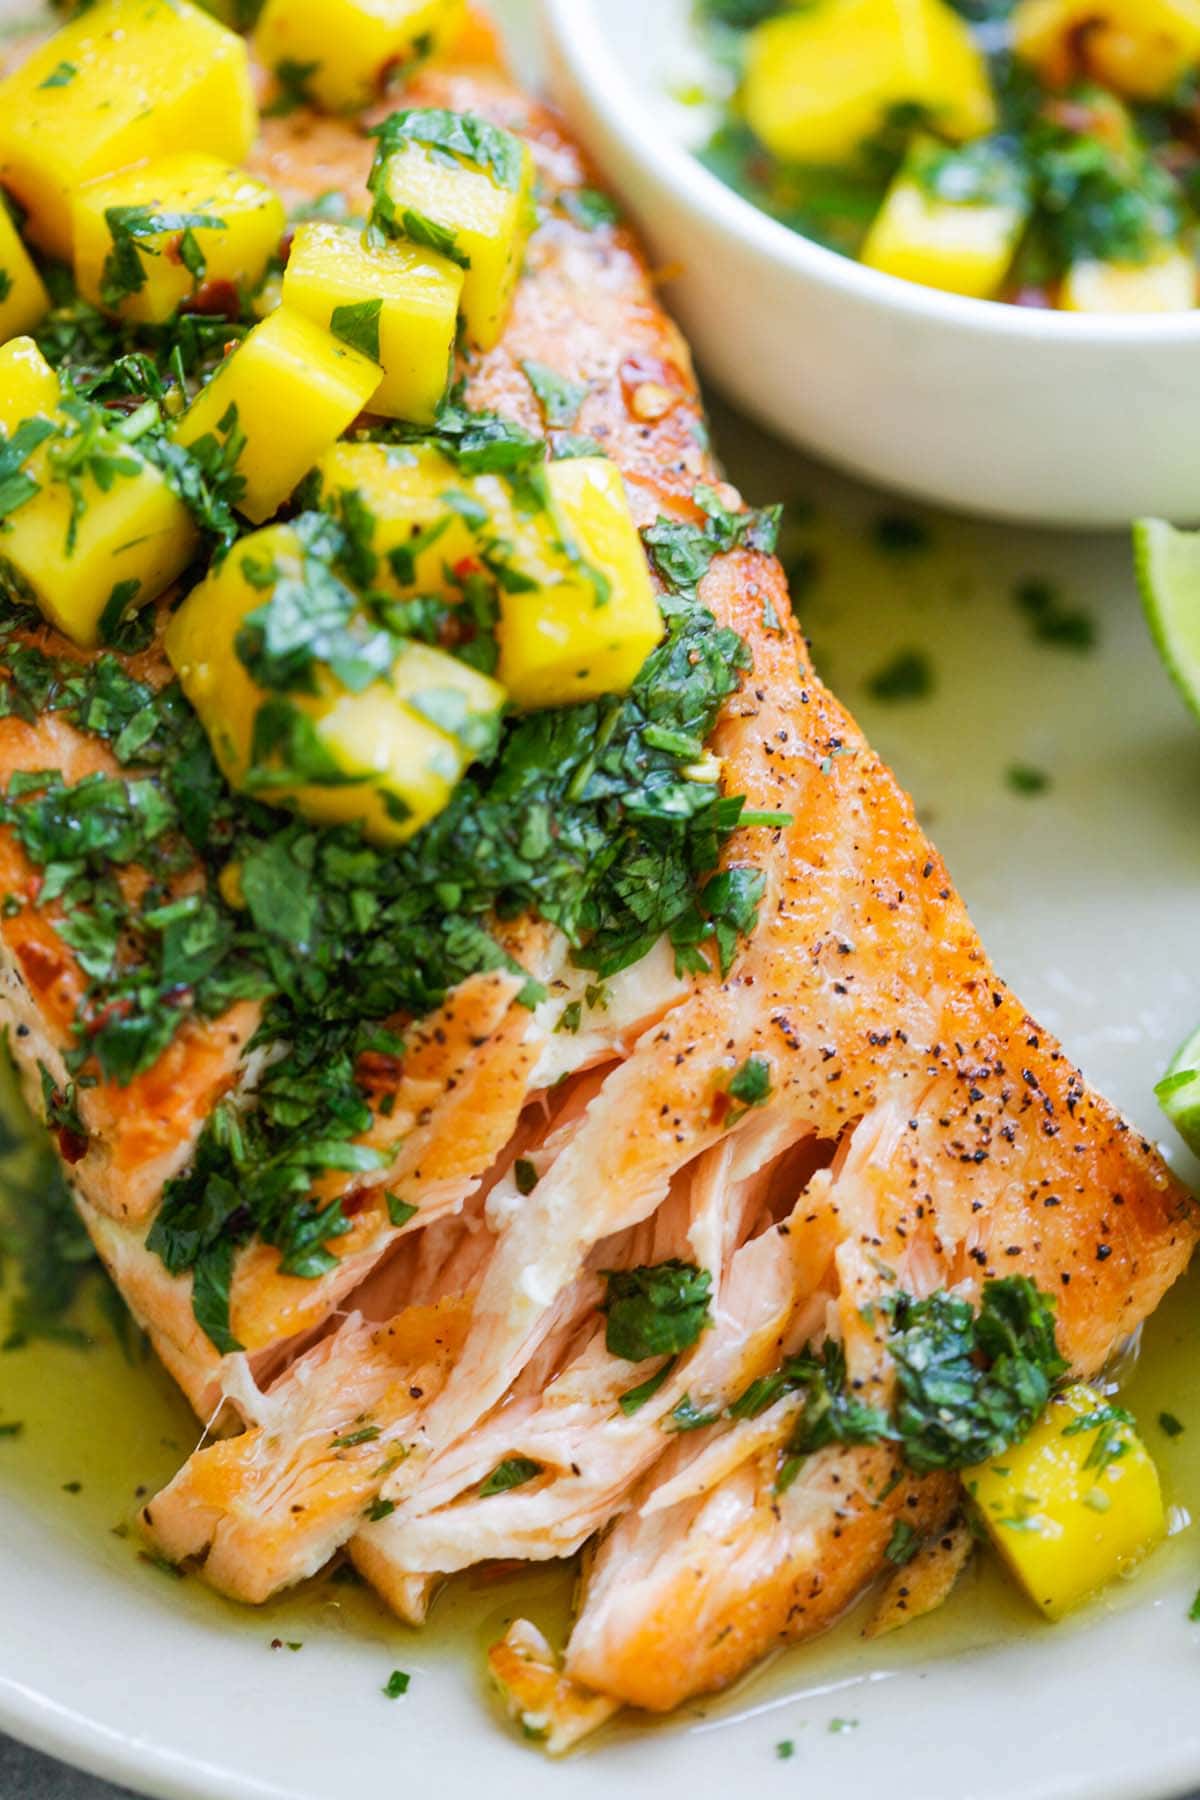 The best chimichurri salmon recipe ever with mango. So easy, restaurant quality and perfect for dinner tonight.